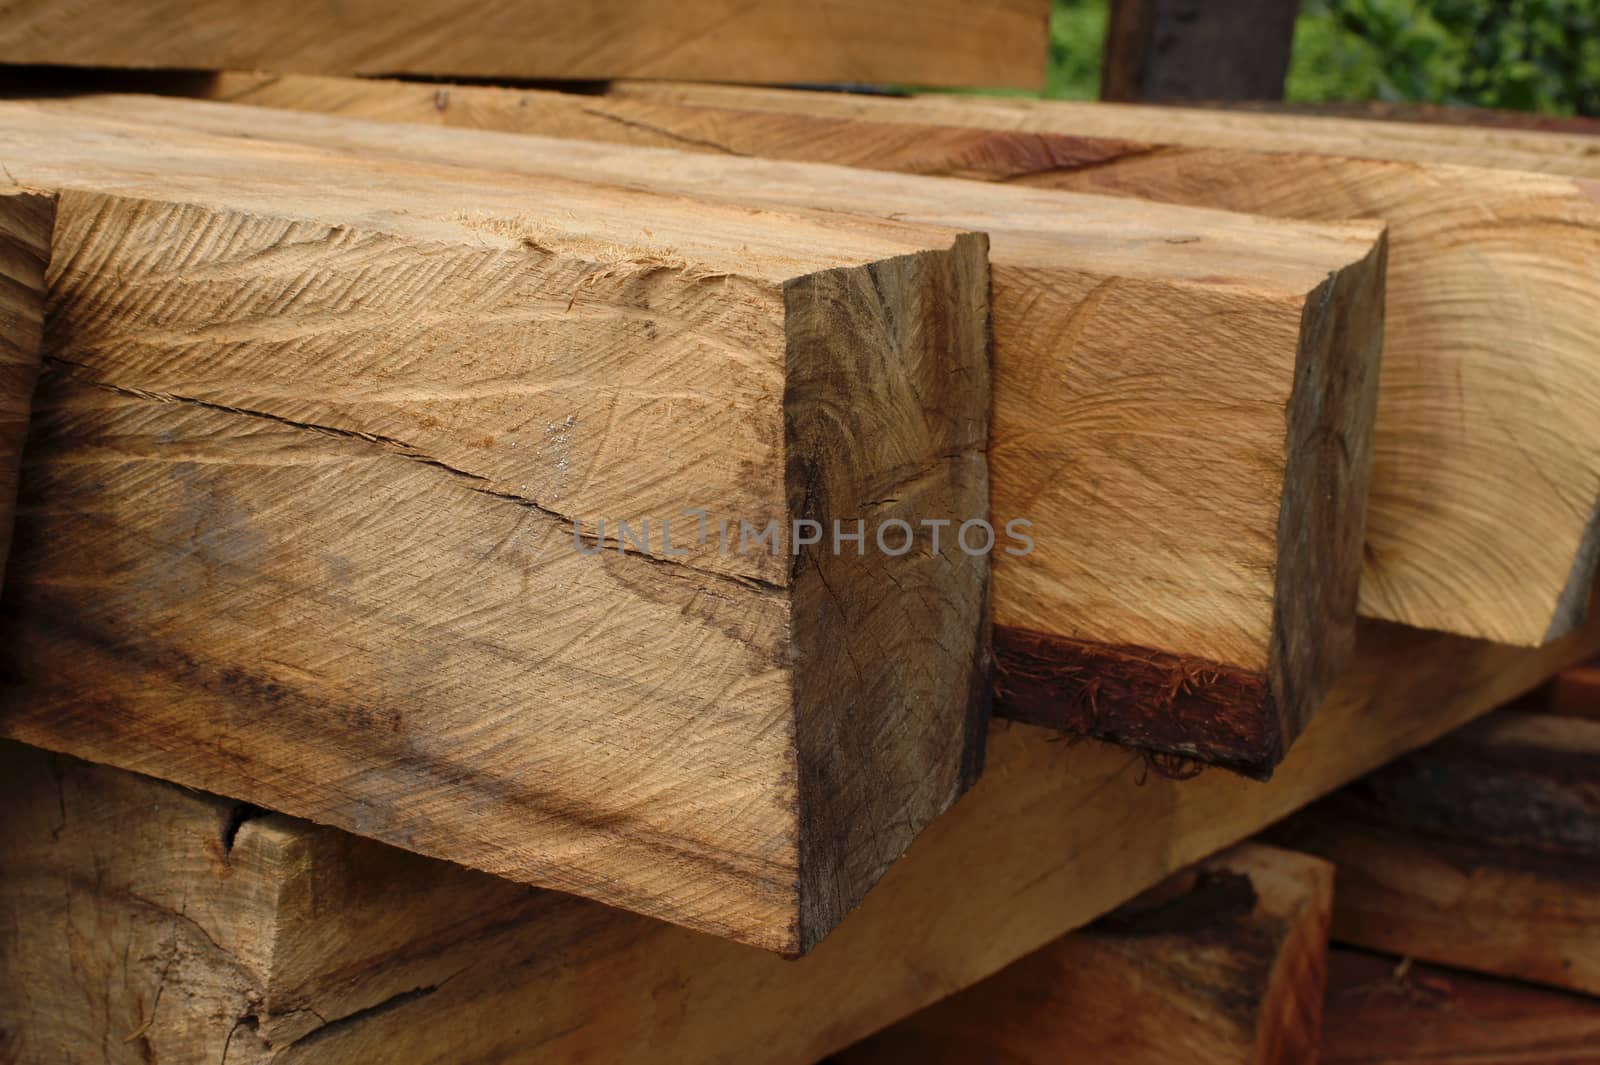 Timber for furniture making.